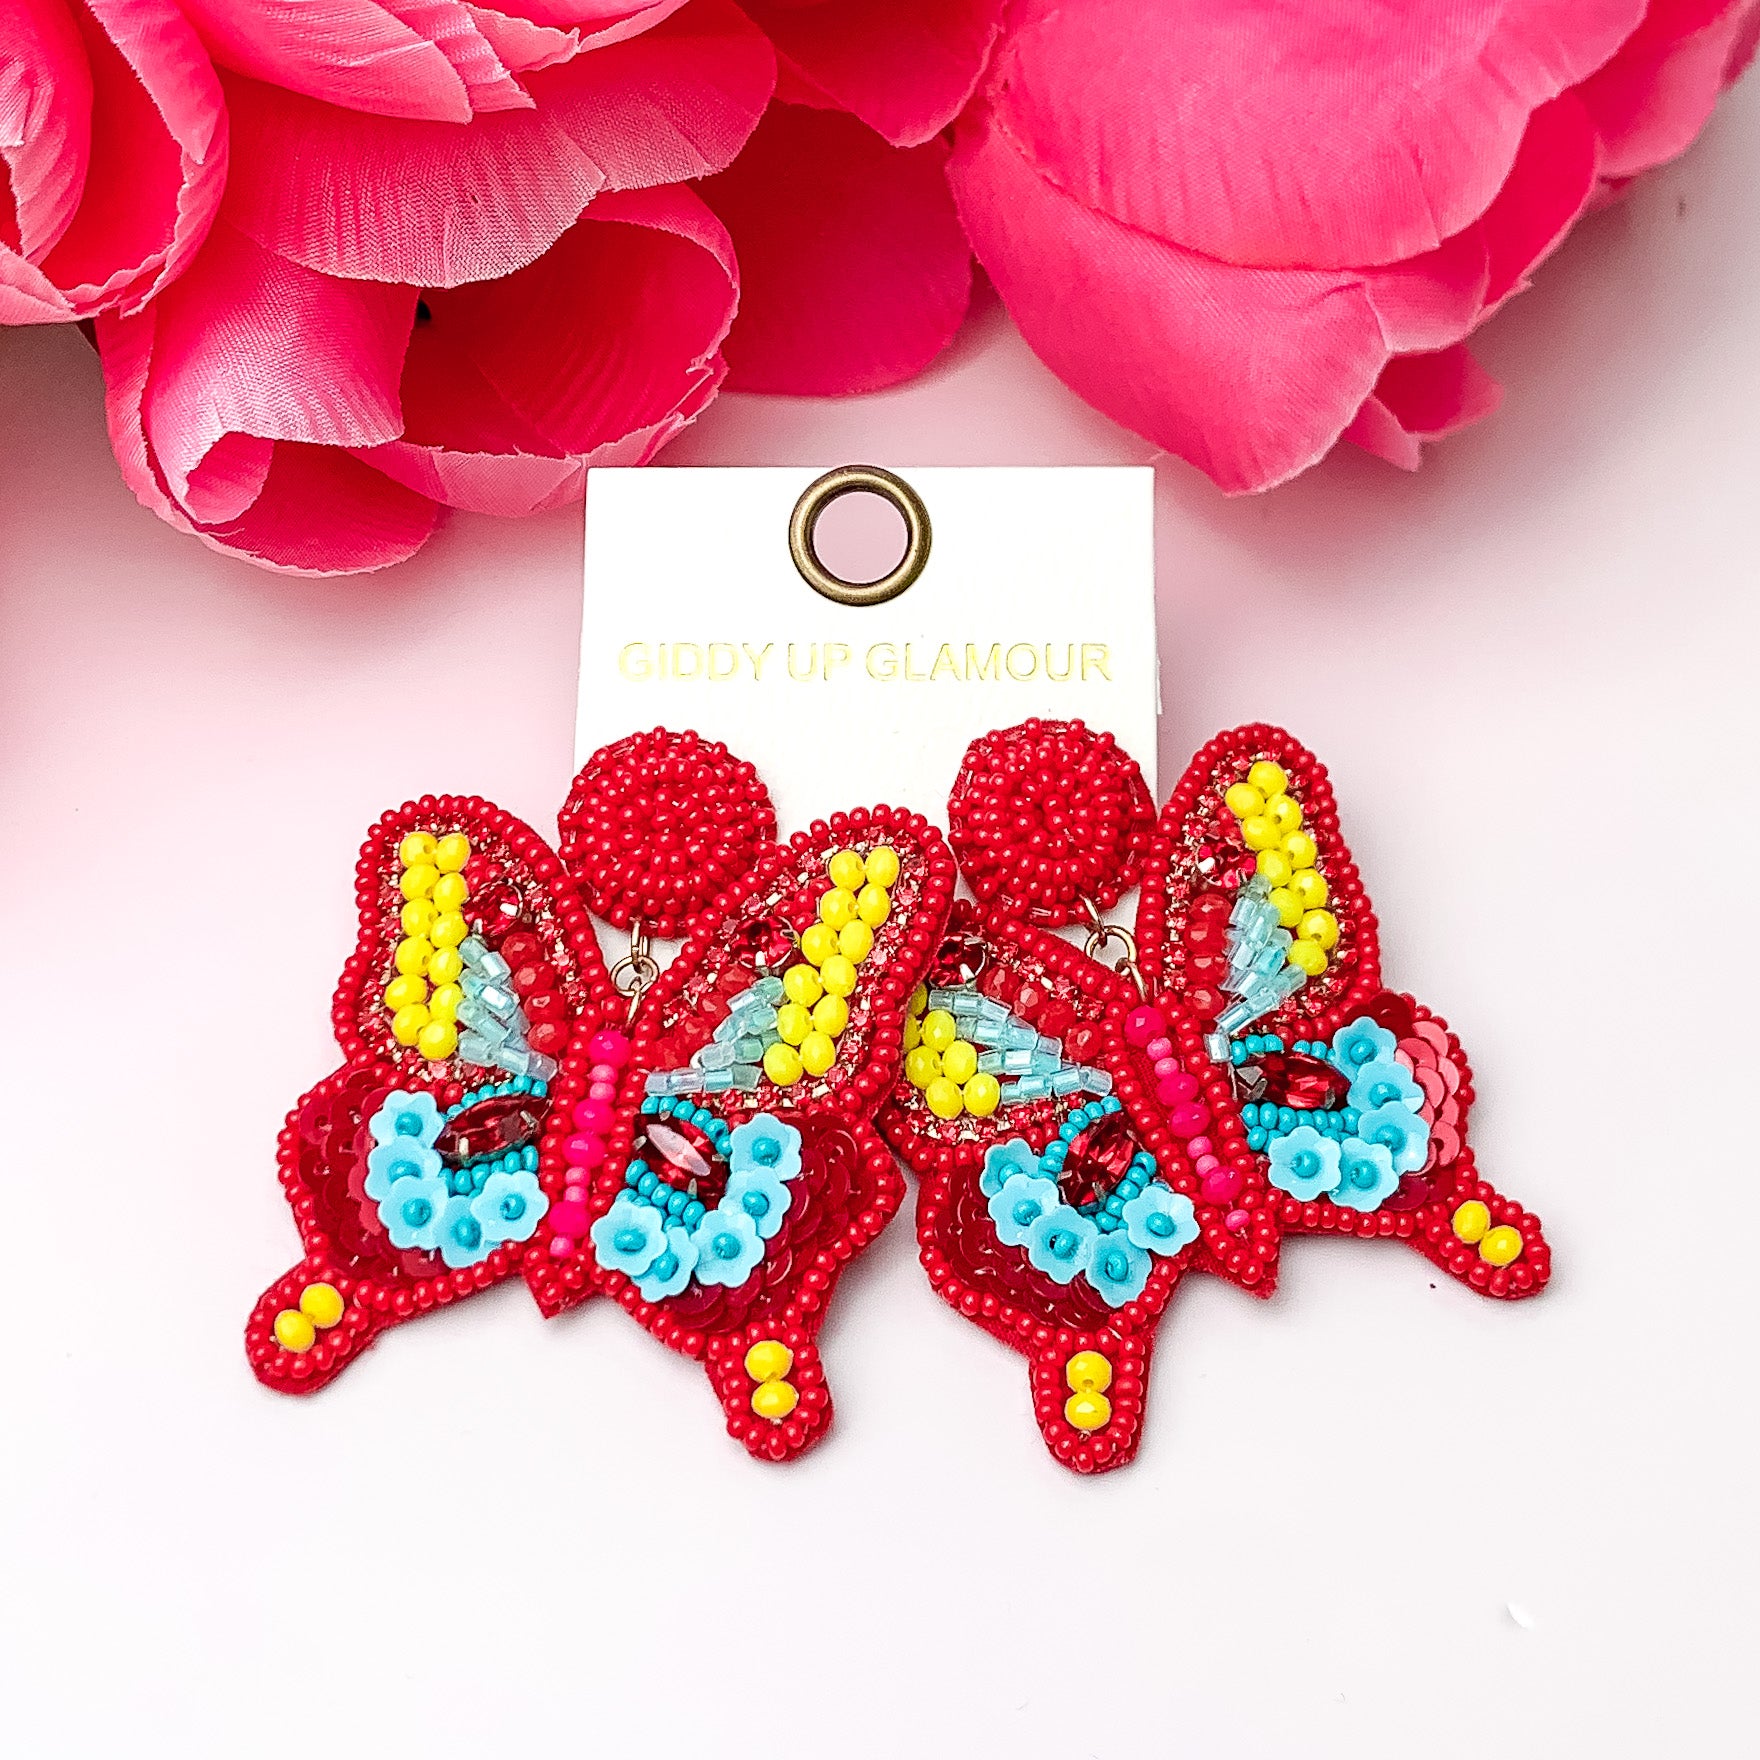 Butterfy beaded earrings in red, yellow, and blue. Pictured on a white background with pink flowers at the top. 